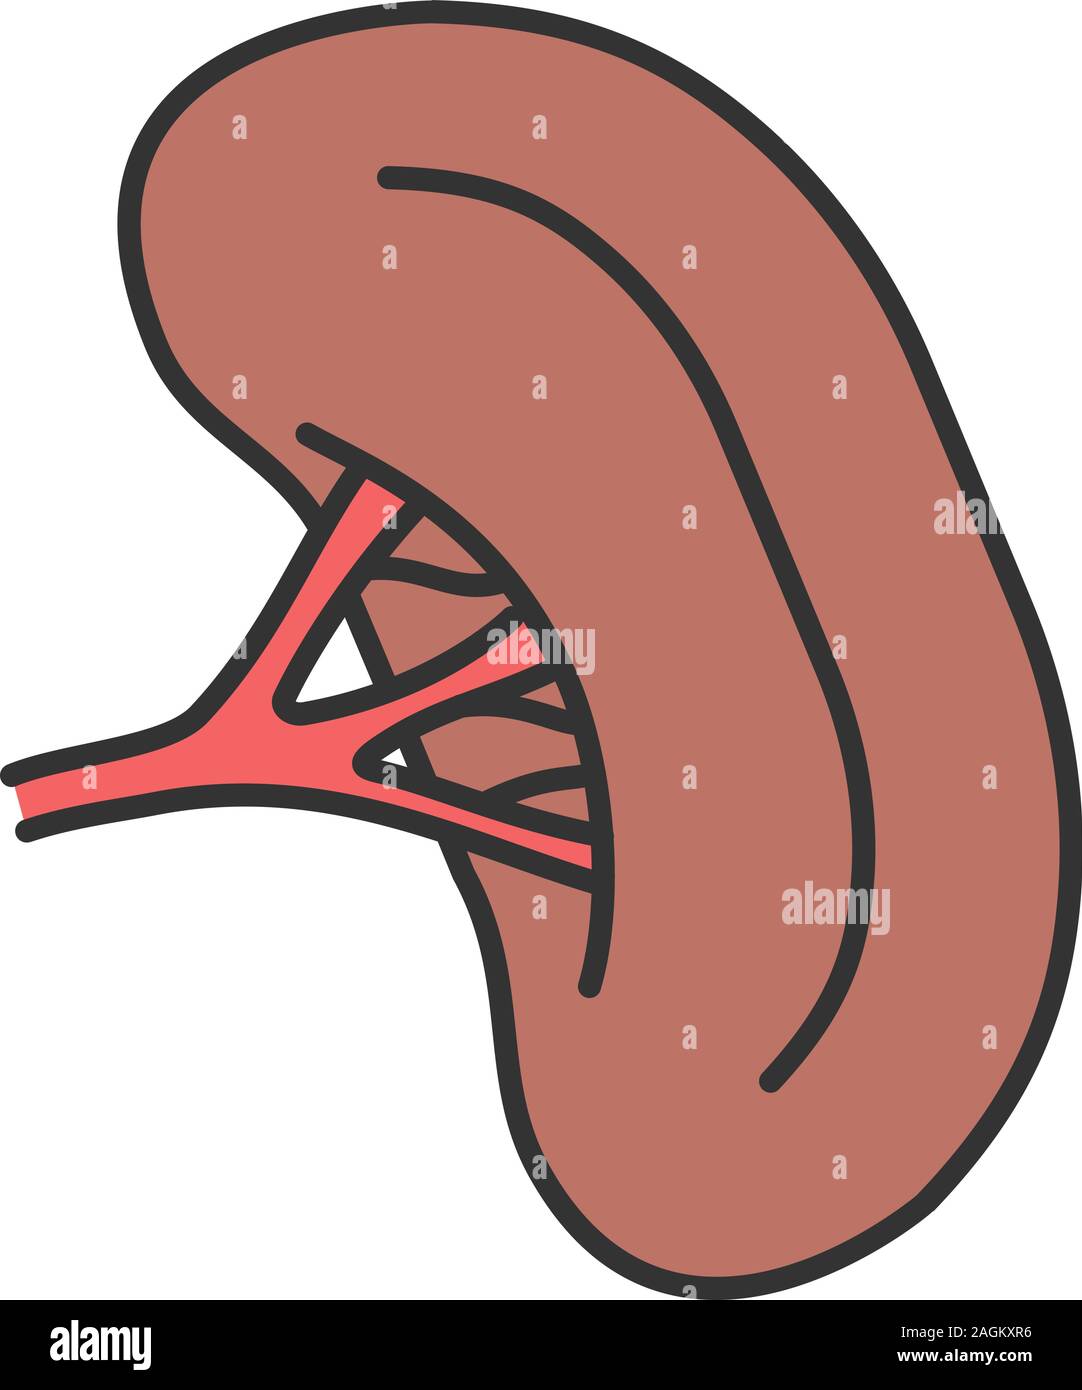 Human lymph node and spleen Stock Vector Images - Alamy